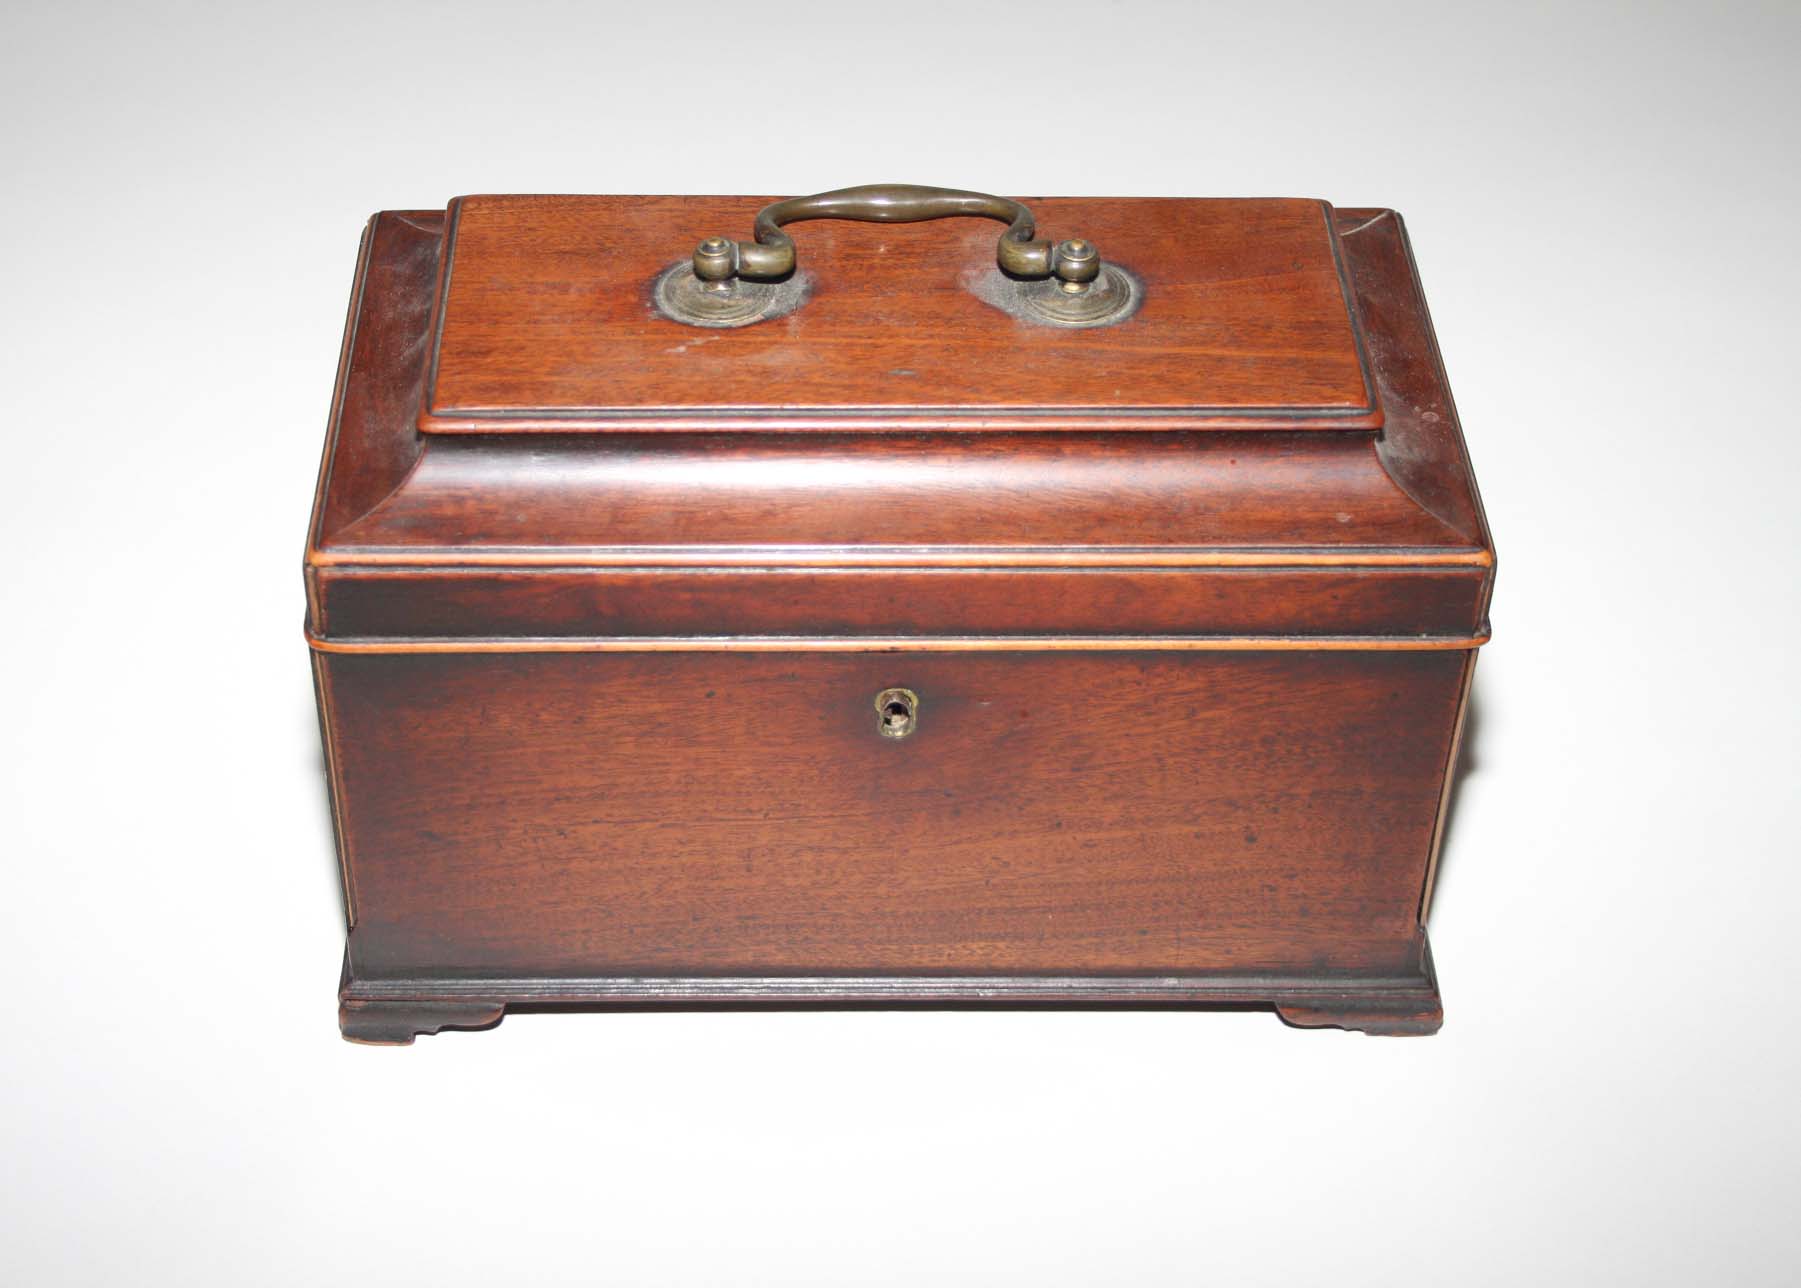 A GEORGE III MAHOGANY TEA CADDY
of sarcophagus form, the hinged top with a brass handle, raised on